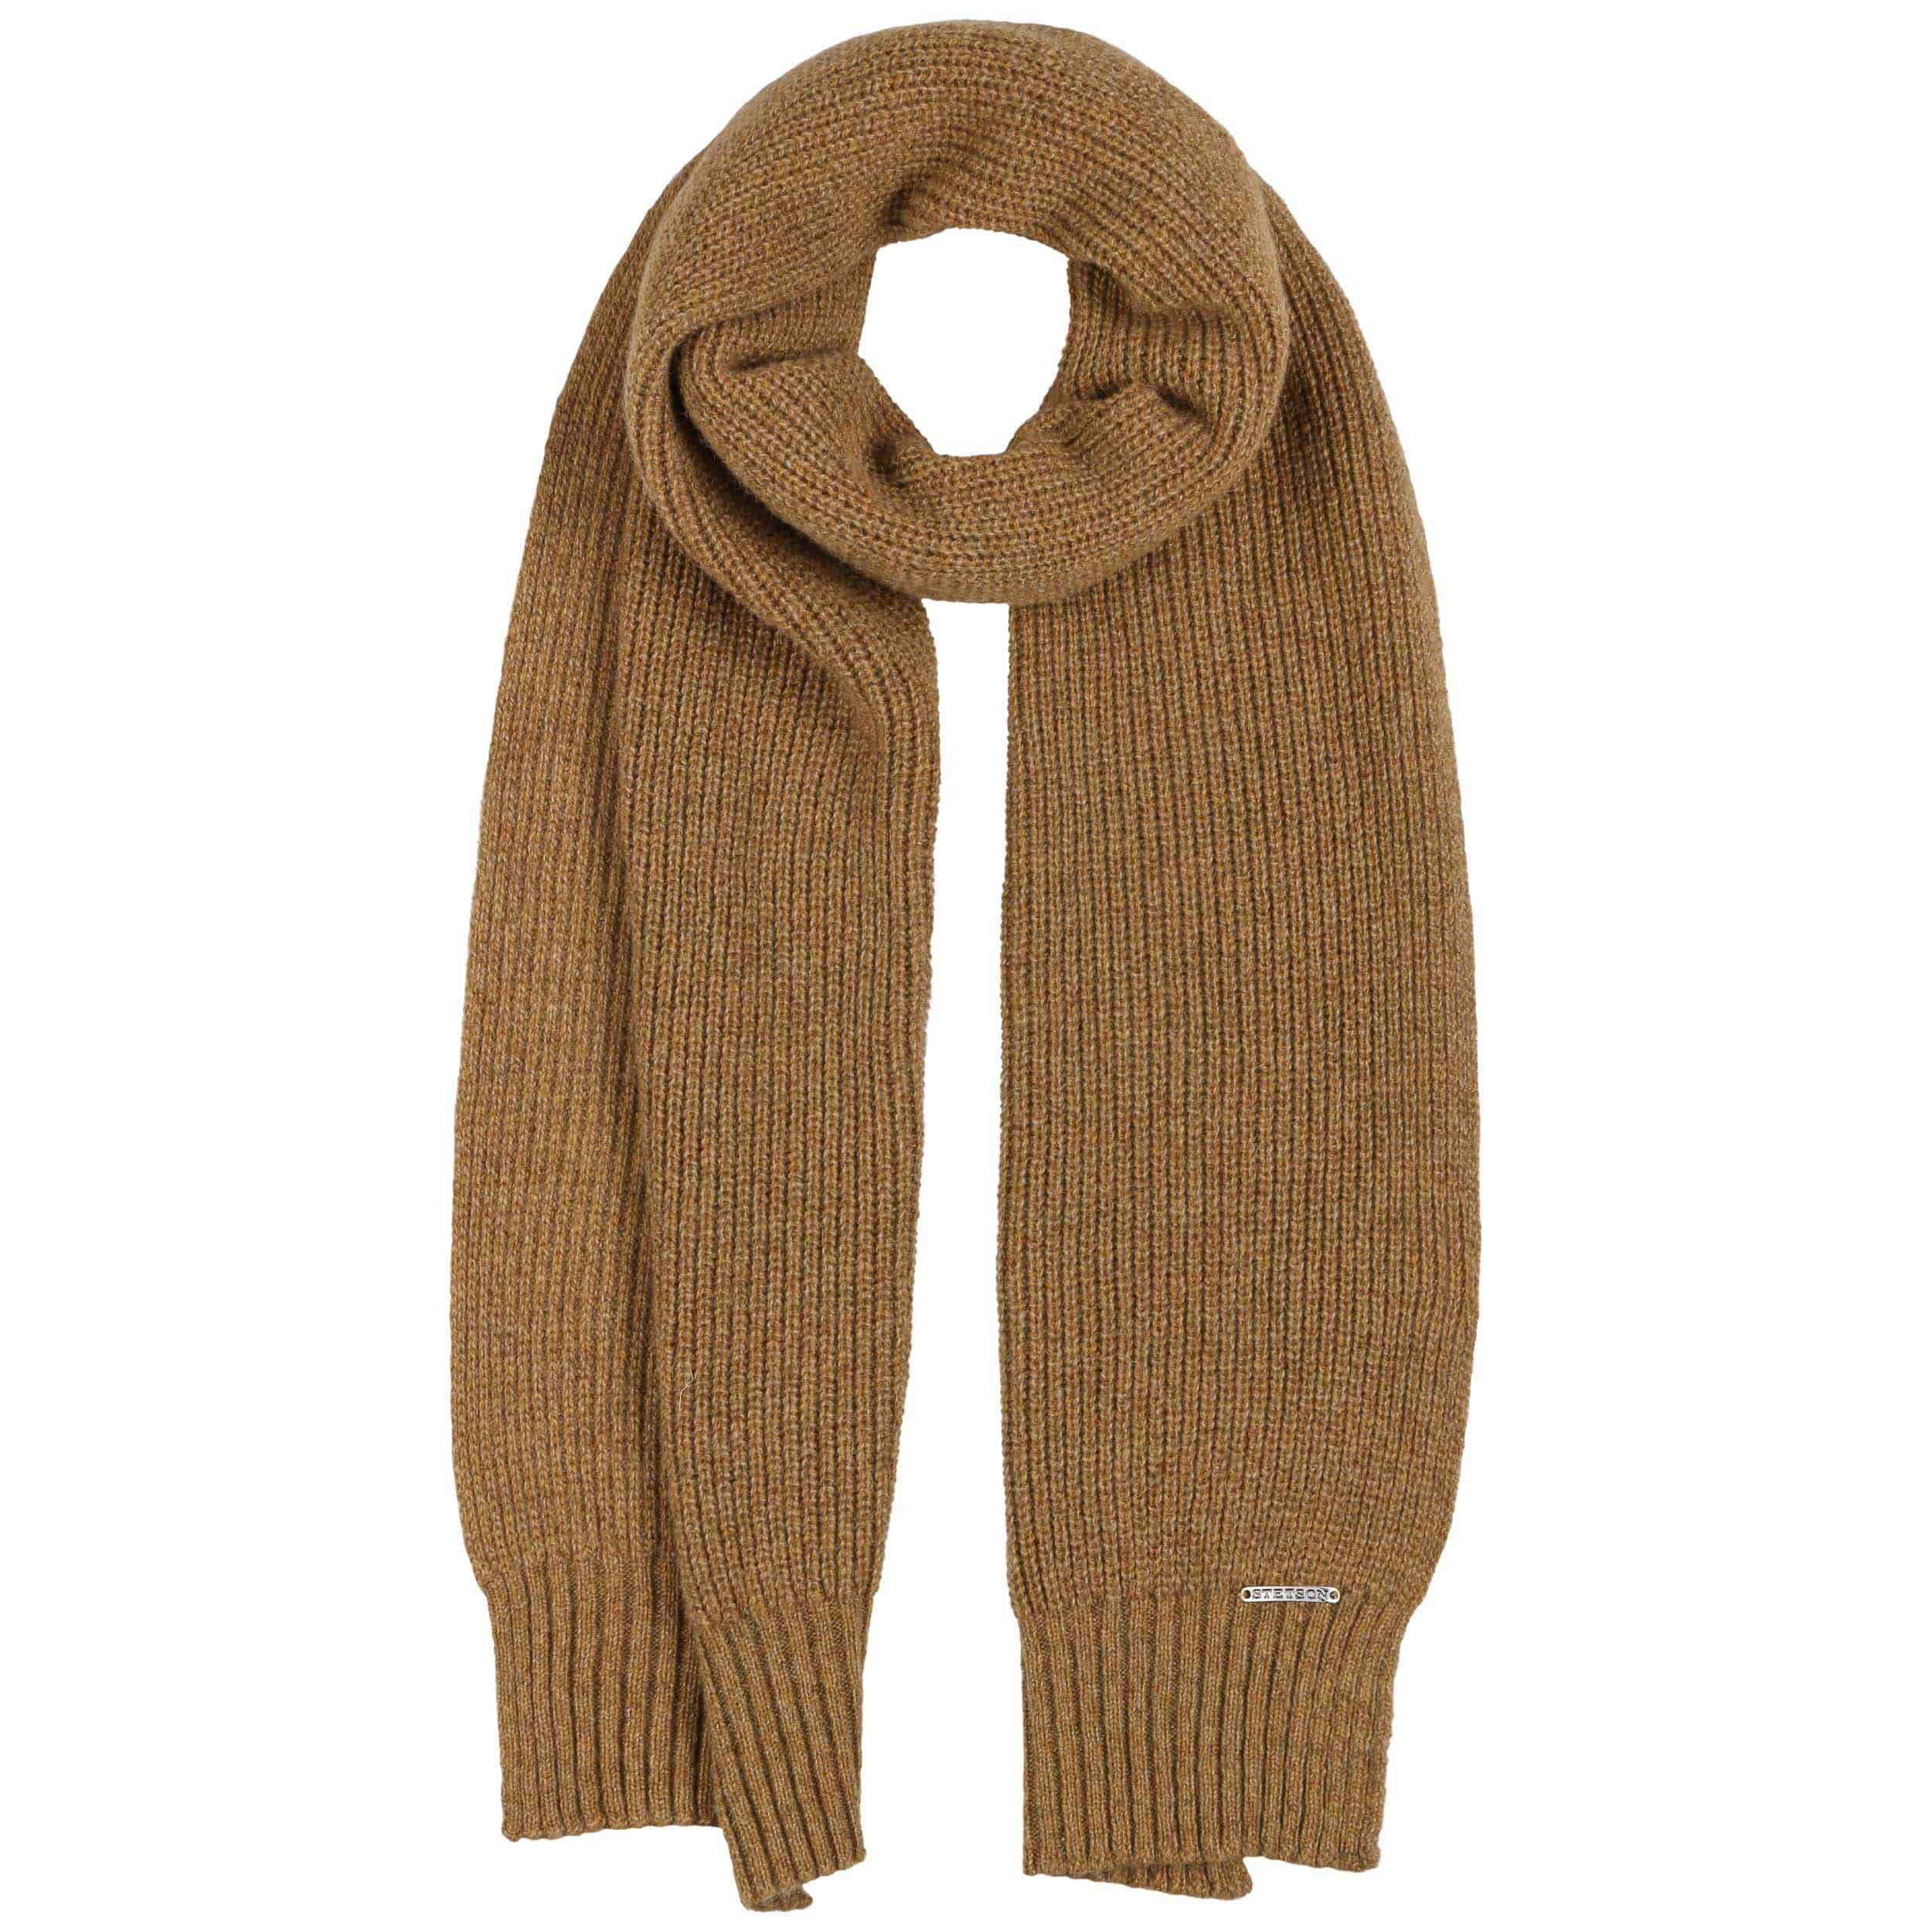 Cuddly scarf for wool-sensitive!